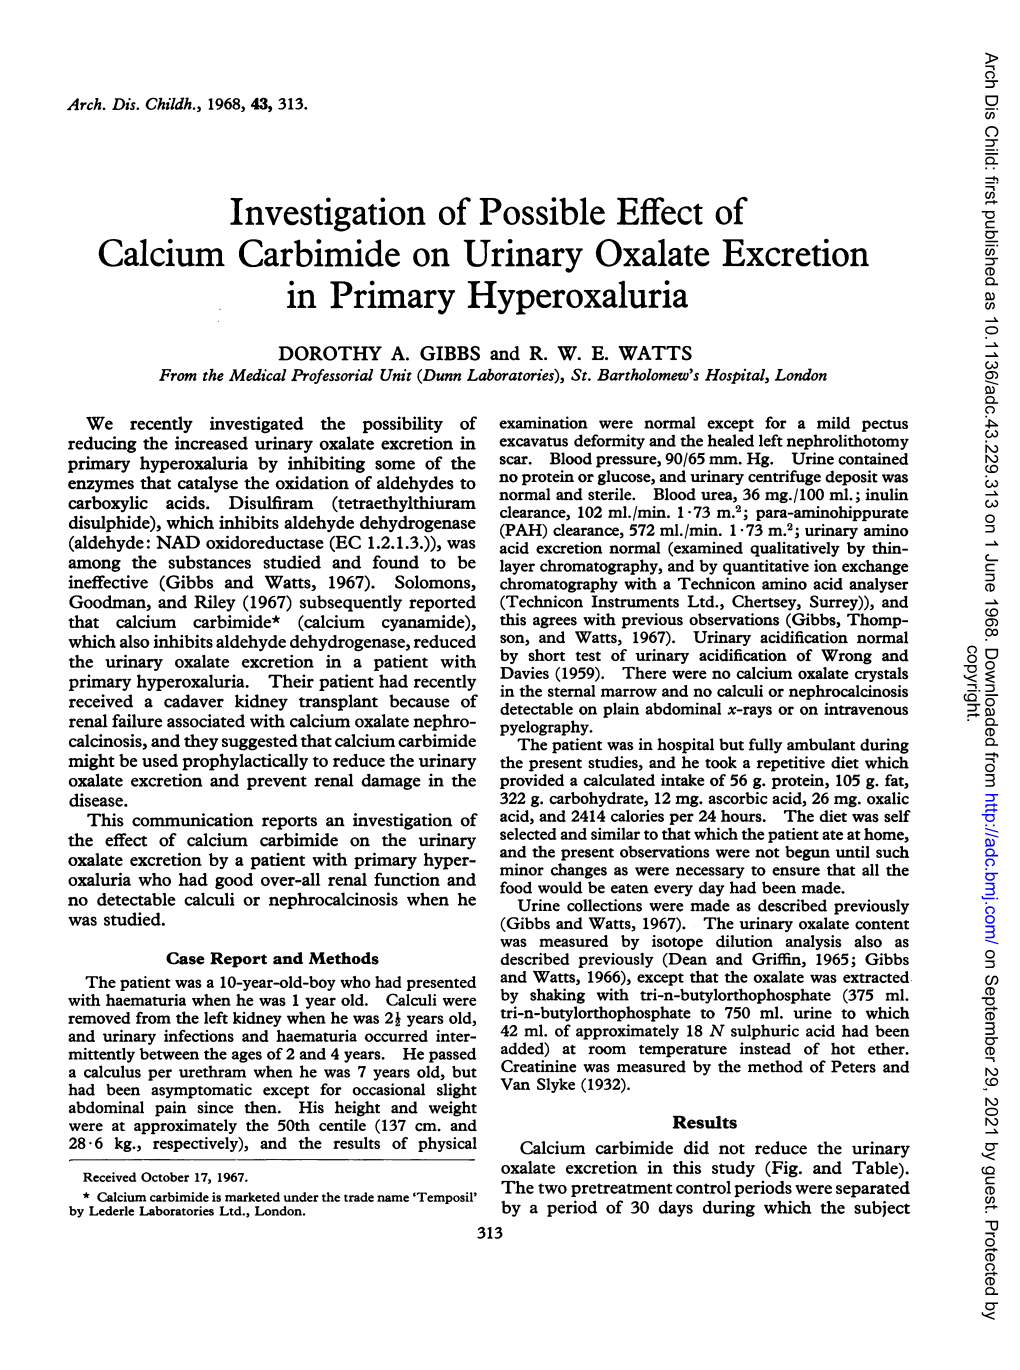 Investigation of Possible Effect of in Primary Hyperoxaluria